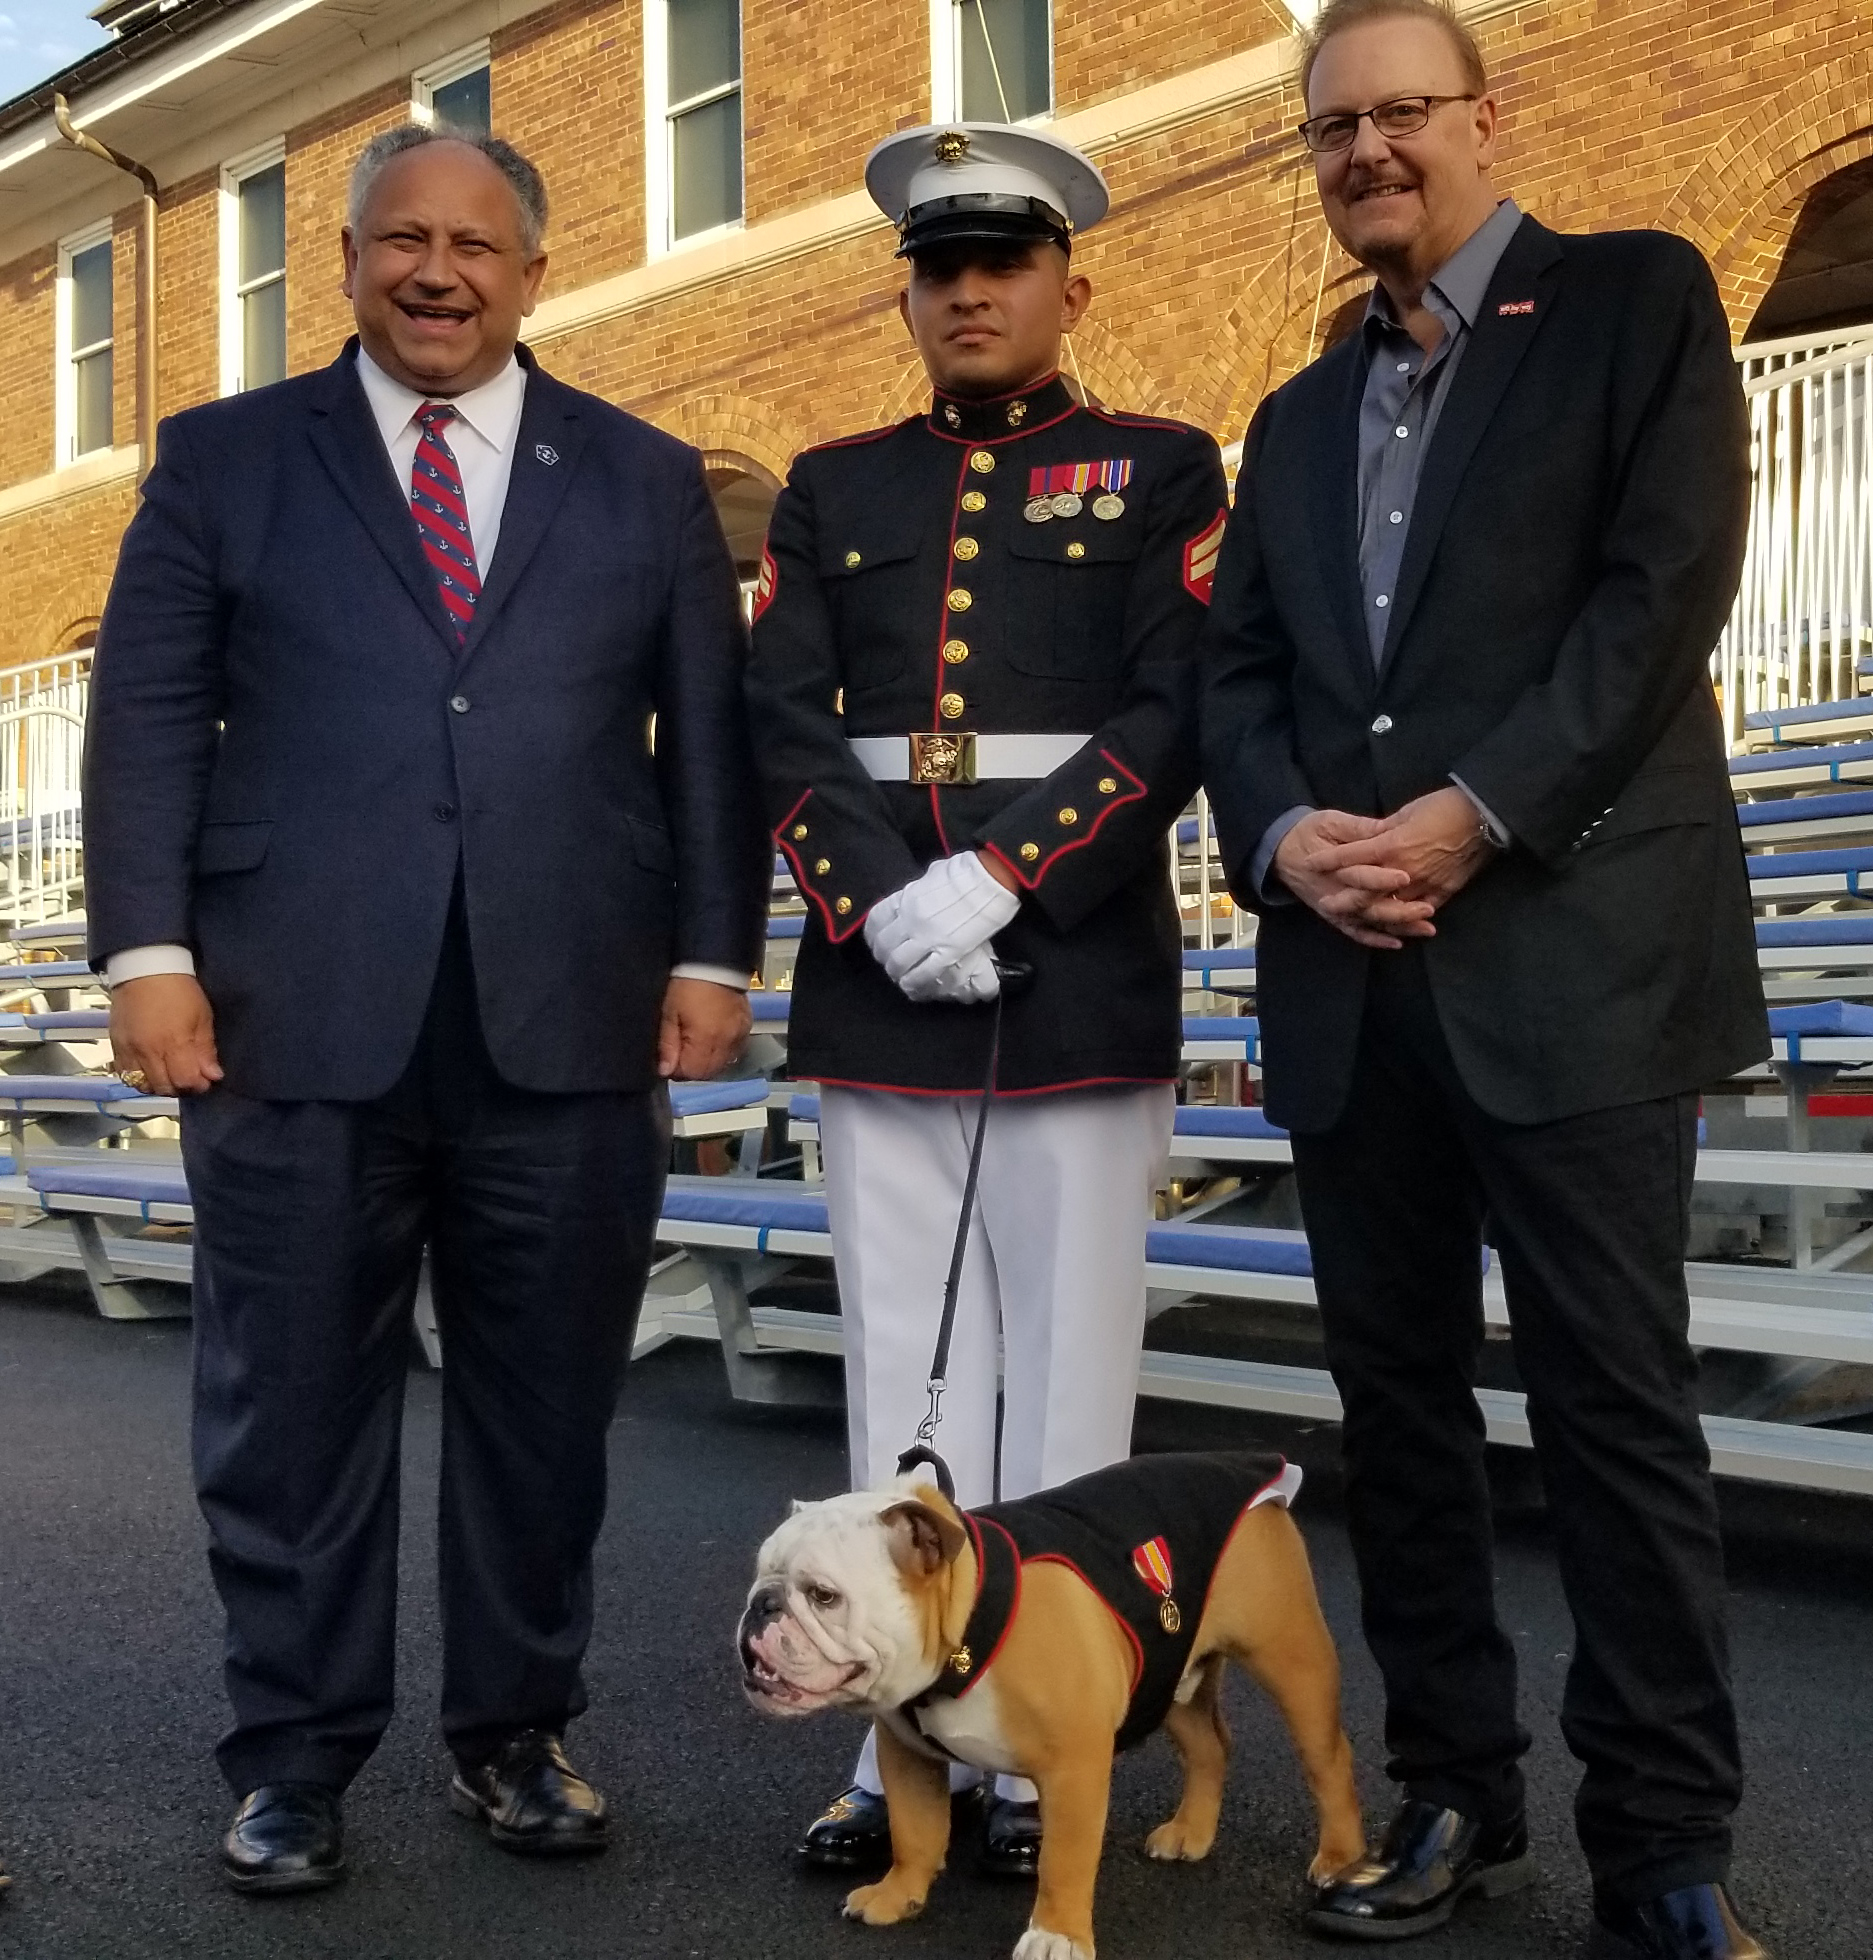 Secretary of the Navy Carlos DelToro and Chesty XVI, official mascot of the US Marine Corp. with Charles Fazzino at 75th Annual Toys for Tots foundation ceremony